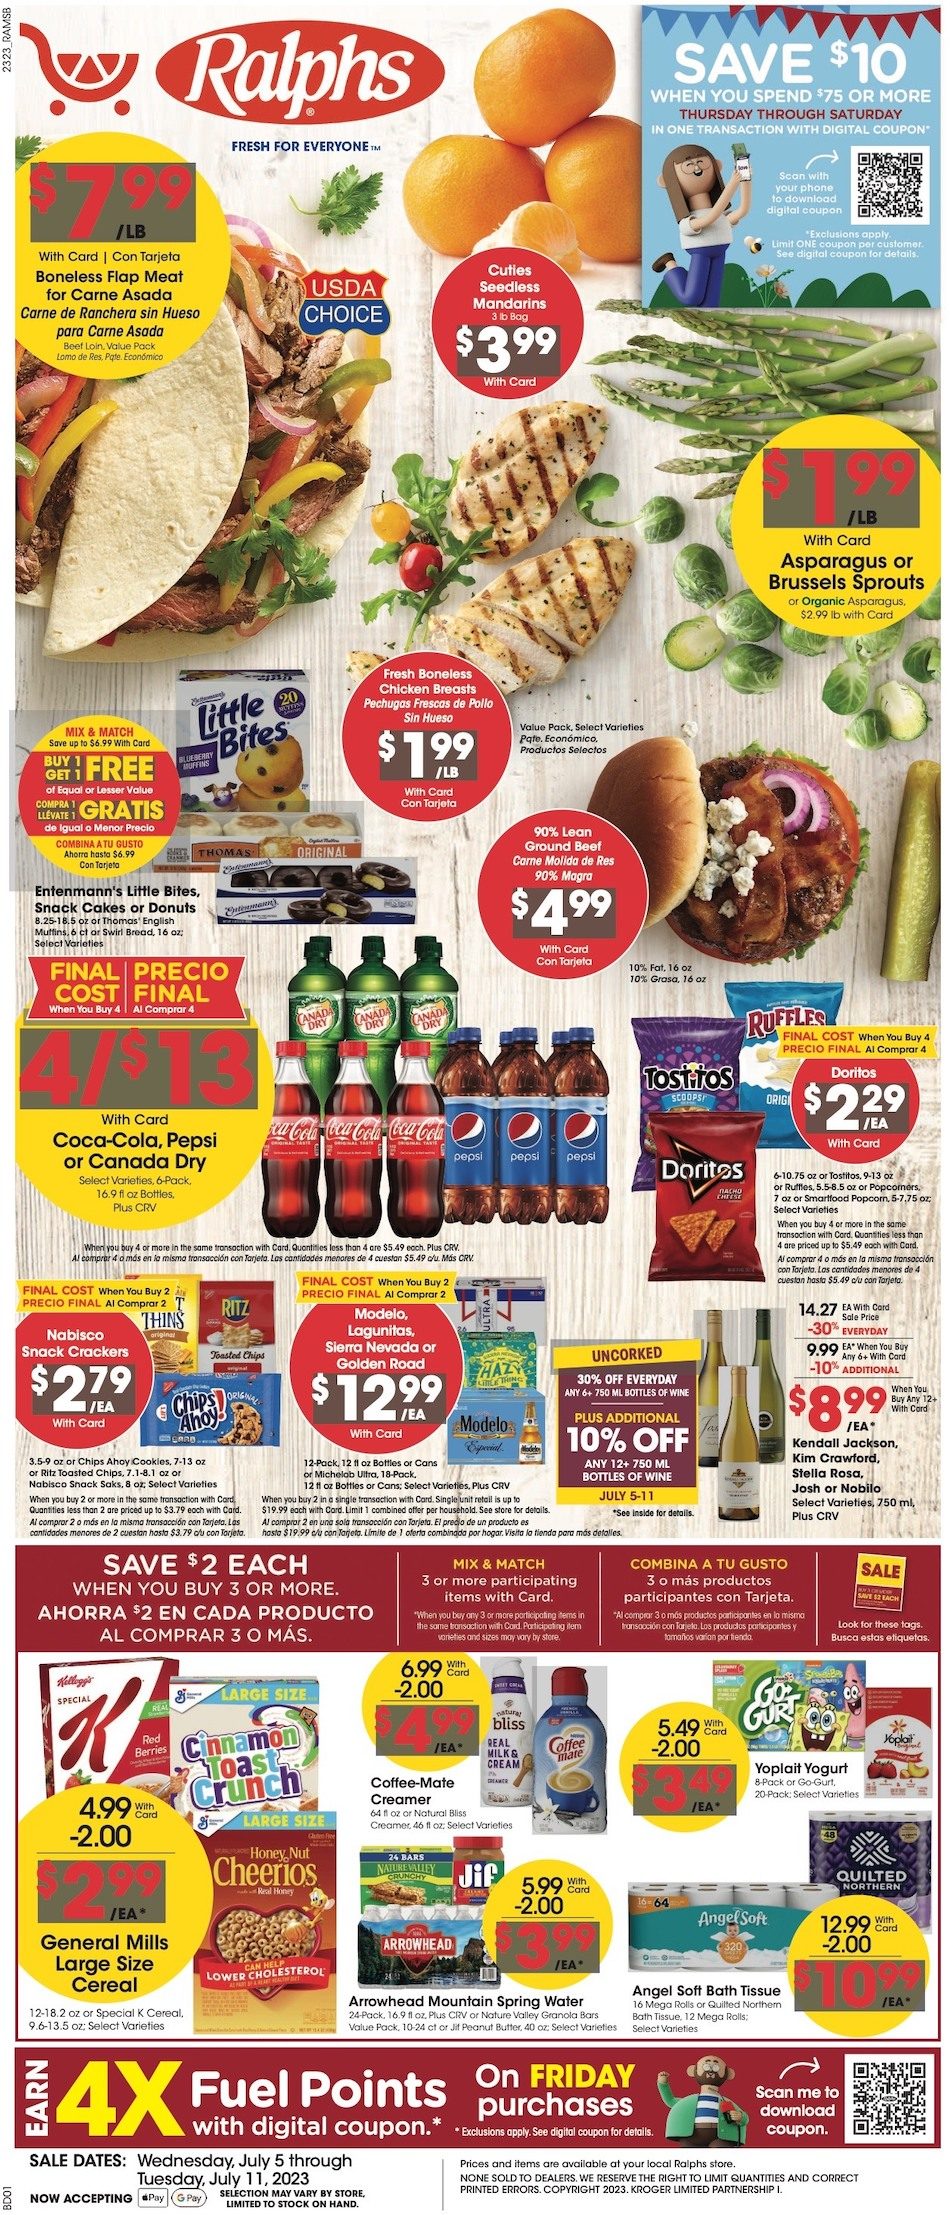 Ralphs Weekly Ad 5th – 11th July 2023 Page 1